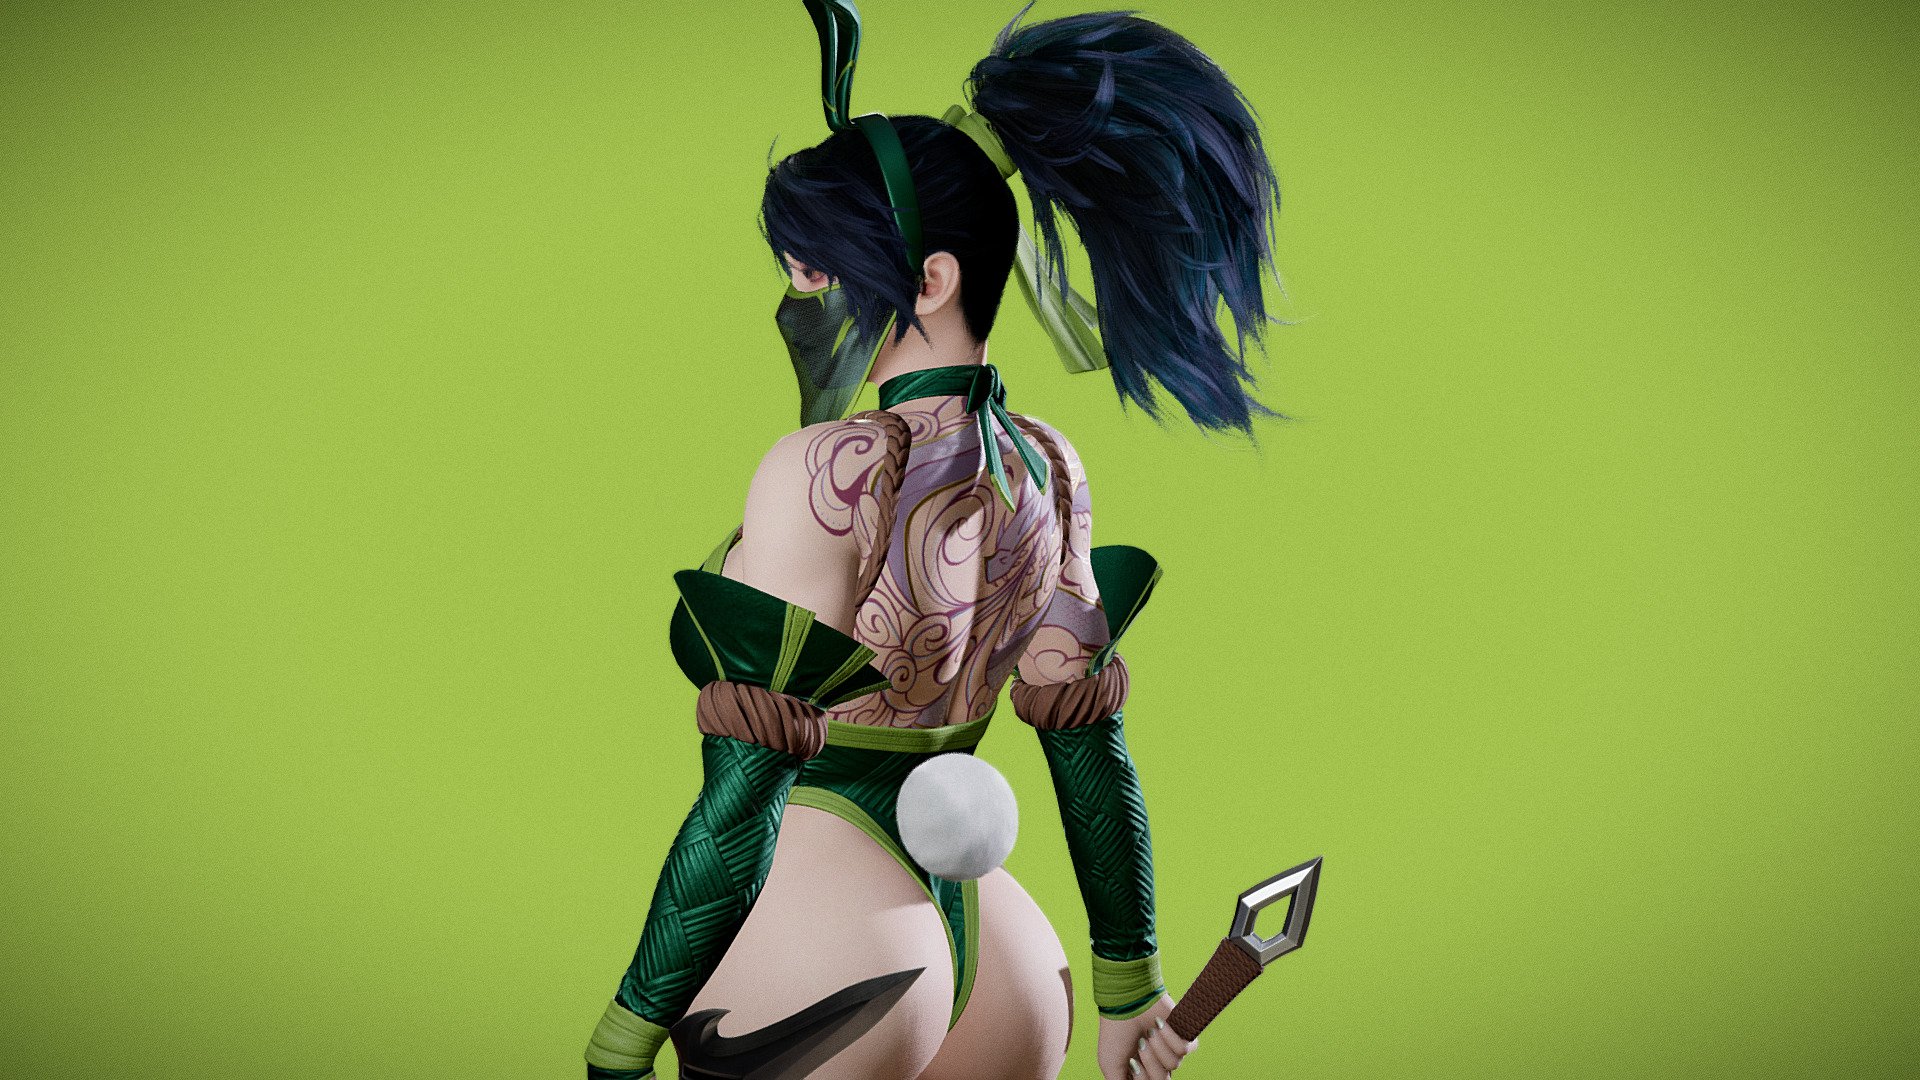 Product name: Battle Bunny Akali

Fan art of Akali in Bunnysuit from League of Legends. Original design by Citemer Liu


Low poly, game ready, rigged, PBR textures. Include nude body mesh. UE5 supported.

Total tris counts: 151410
Unit: centimeters. Model Height: 163 cm

FBX folders contain premade combined fbx for Full Clothes, Half Nude, Full Nude meshes. And Modular folder for individual parts


Full vagina and nipples modeled.
UE5 project
.blend file. Blender 3.6.1. Fully rigged with AutoRigPro plugin with MustardUI for switching clothing parts.
3Ds Max scenes with UE5 skeleton.
PBR textures (Metallic-Roughness) 2048X2048 and 4096x4096. DirectX Normal Maps. .TGA format.

Textures can be found in this folder: RyanReos_BunnyAkaliAssetsTextures

After purchase, please download the &ldquo;RyanReos_BunnyAkali_SketchfabVersion.zip